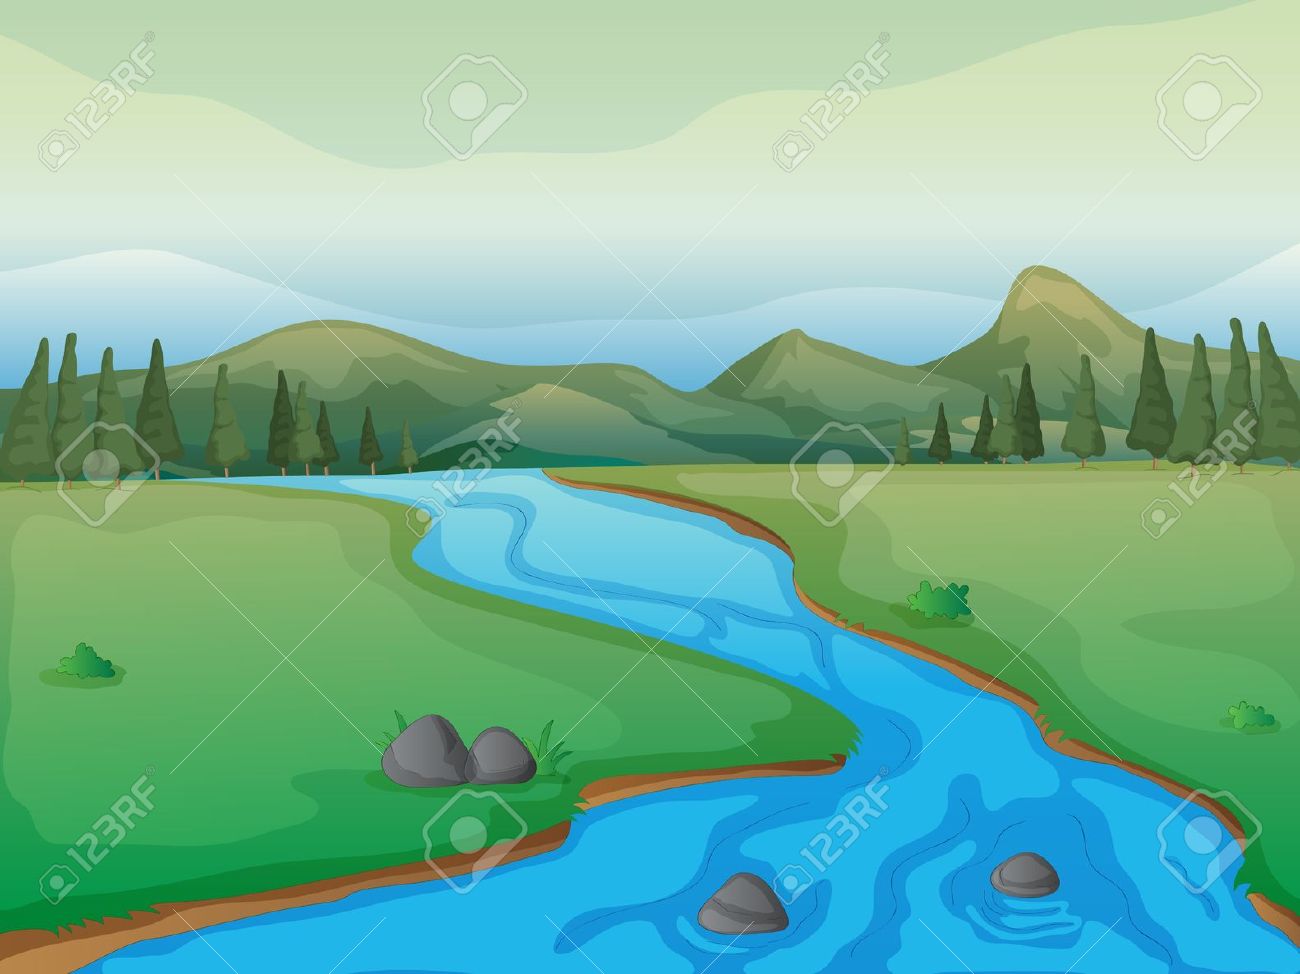 river animated clipart - photo #9